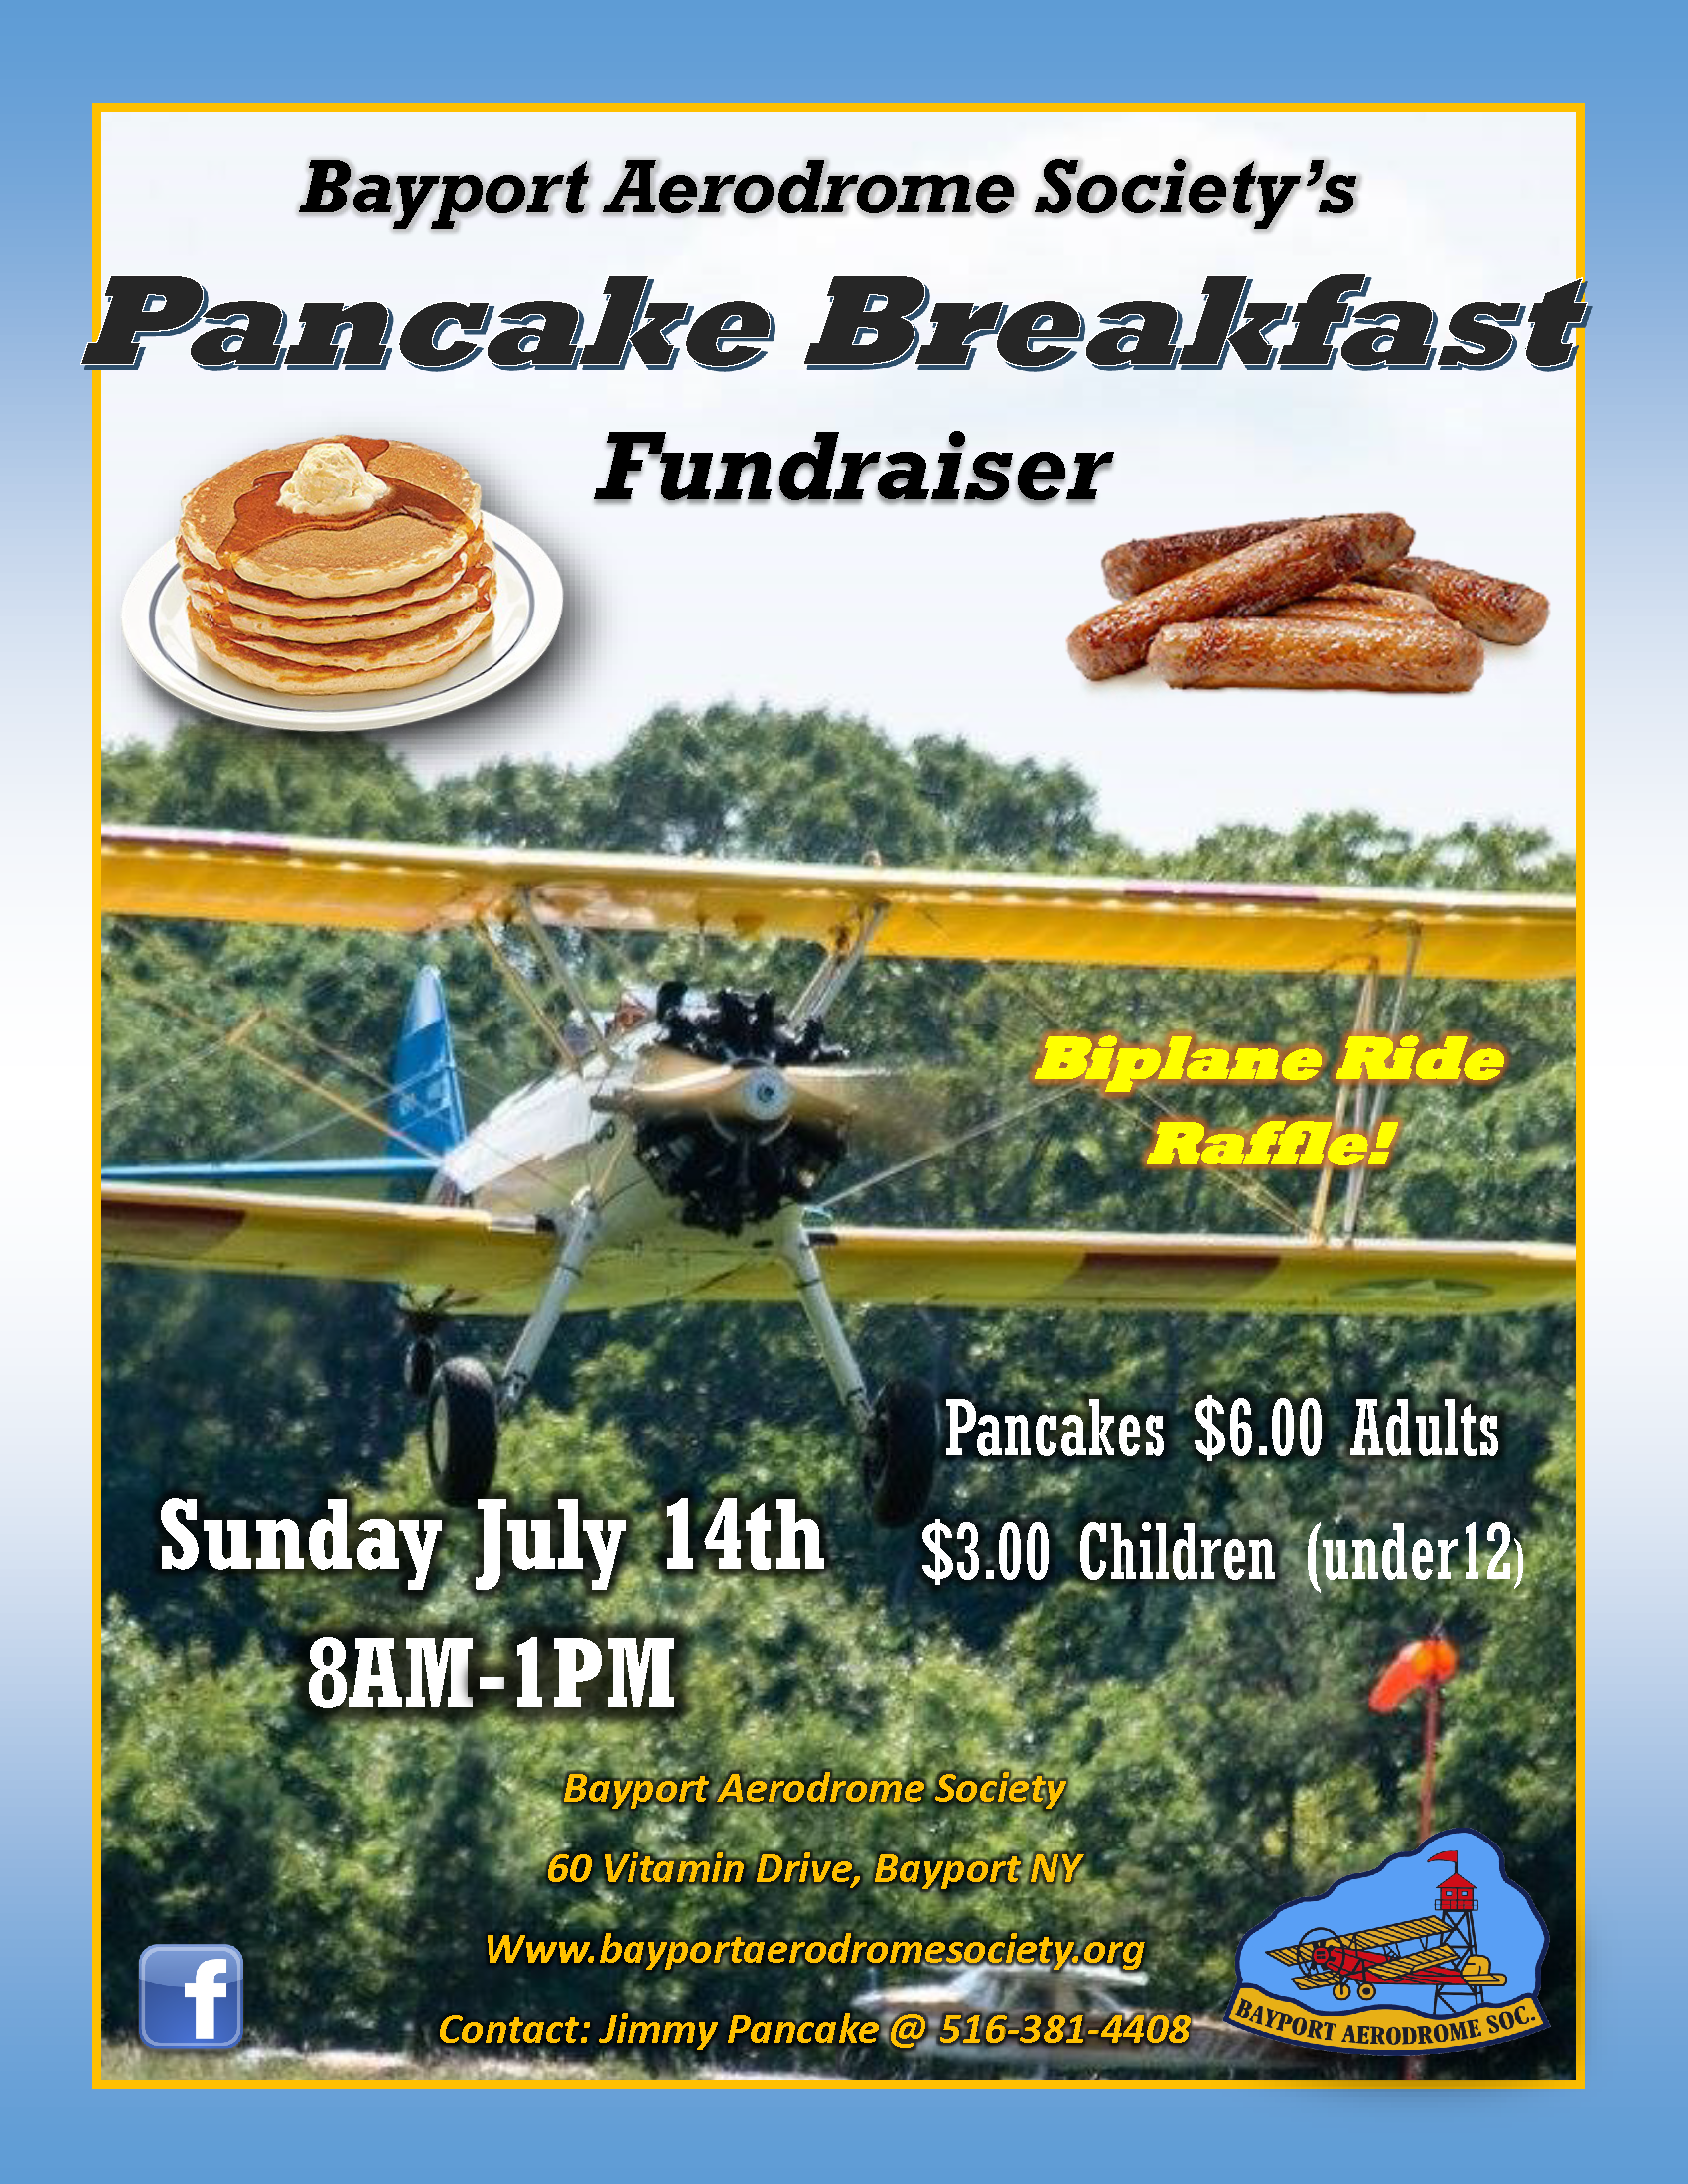 a picture of a propeller plane flying above the tree line, announcing the Pancake breakfast fundraiser. Call 516-381-4408, for more information